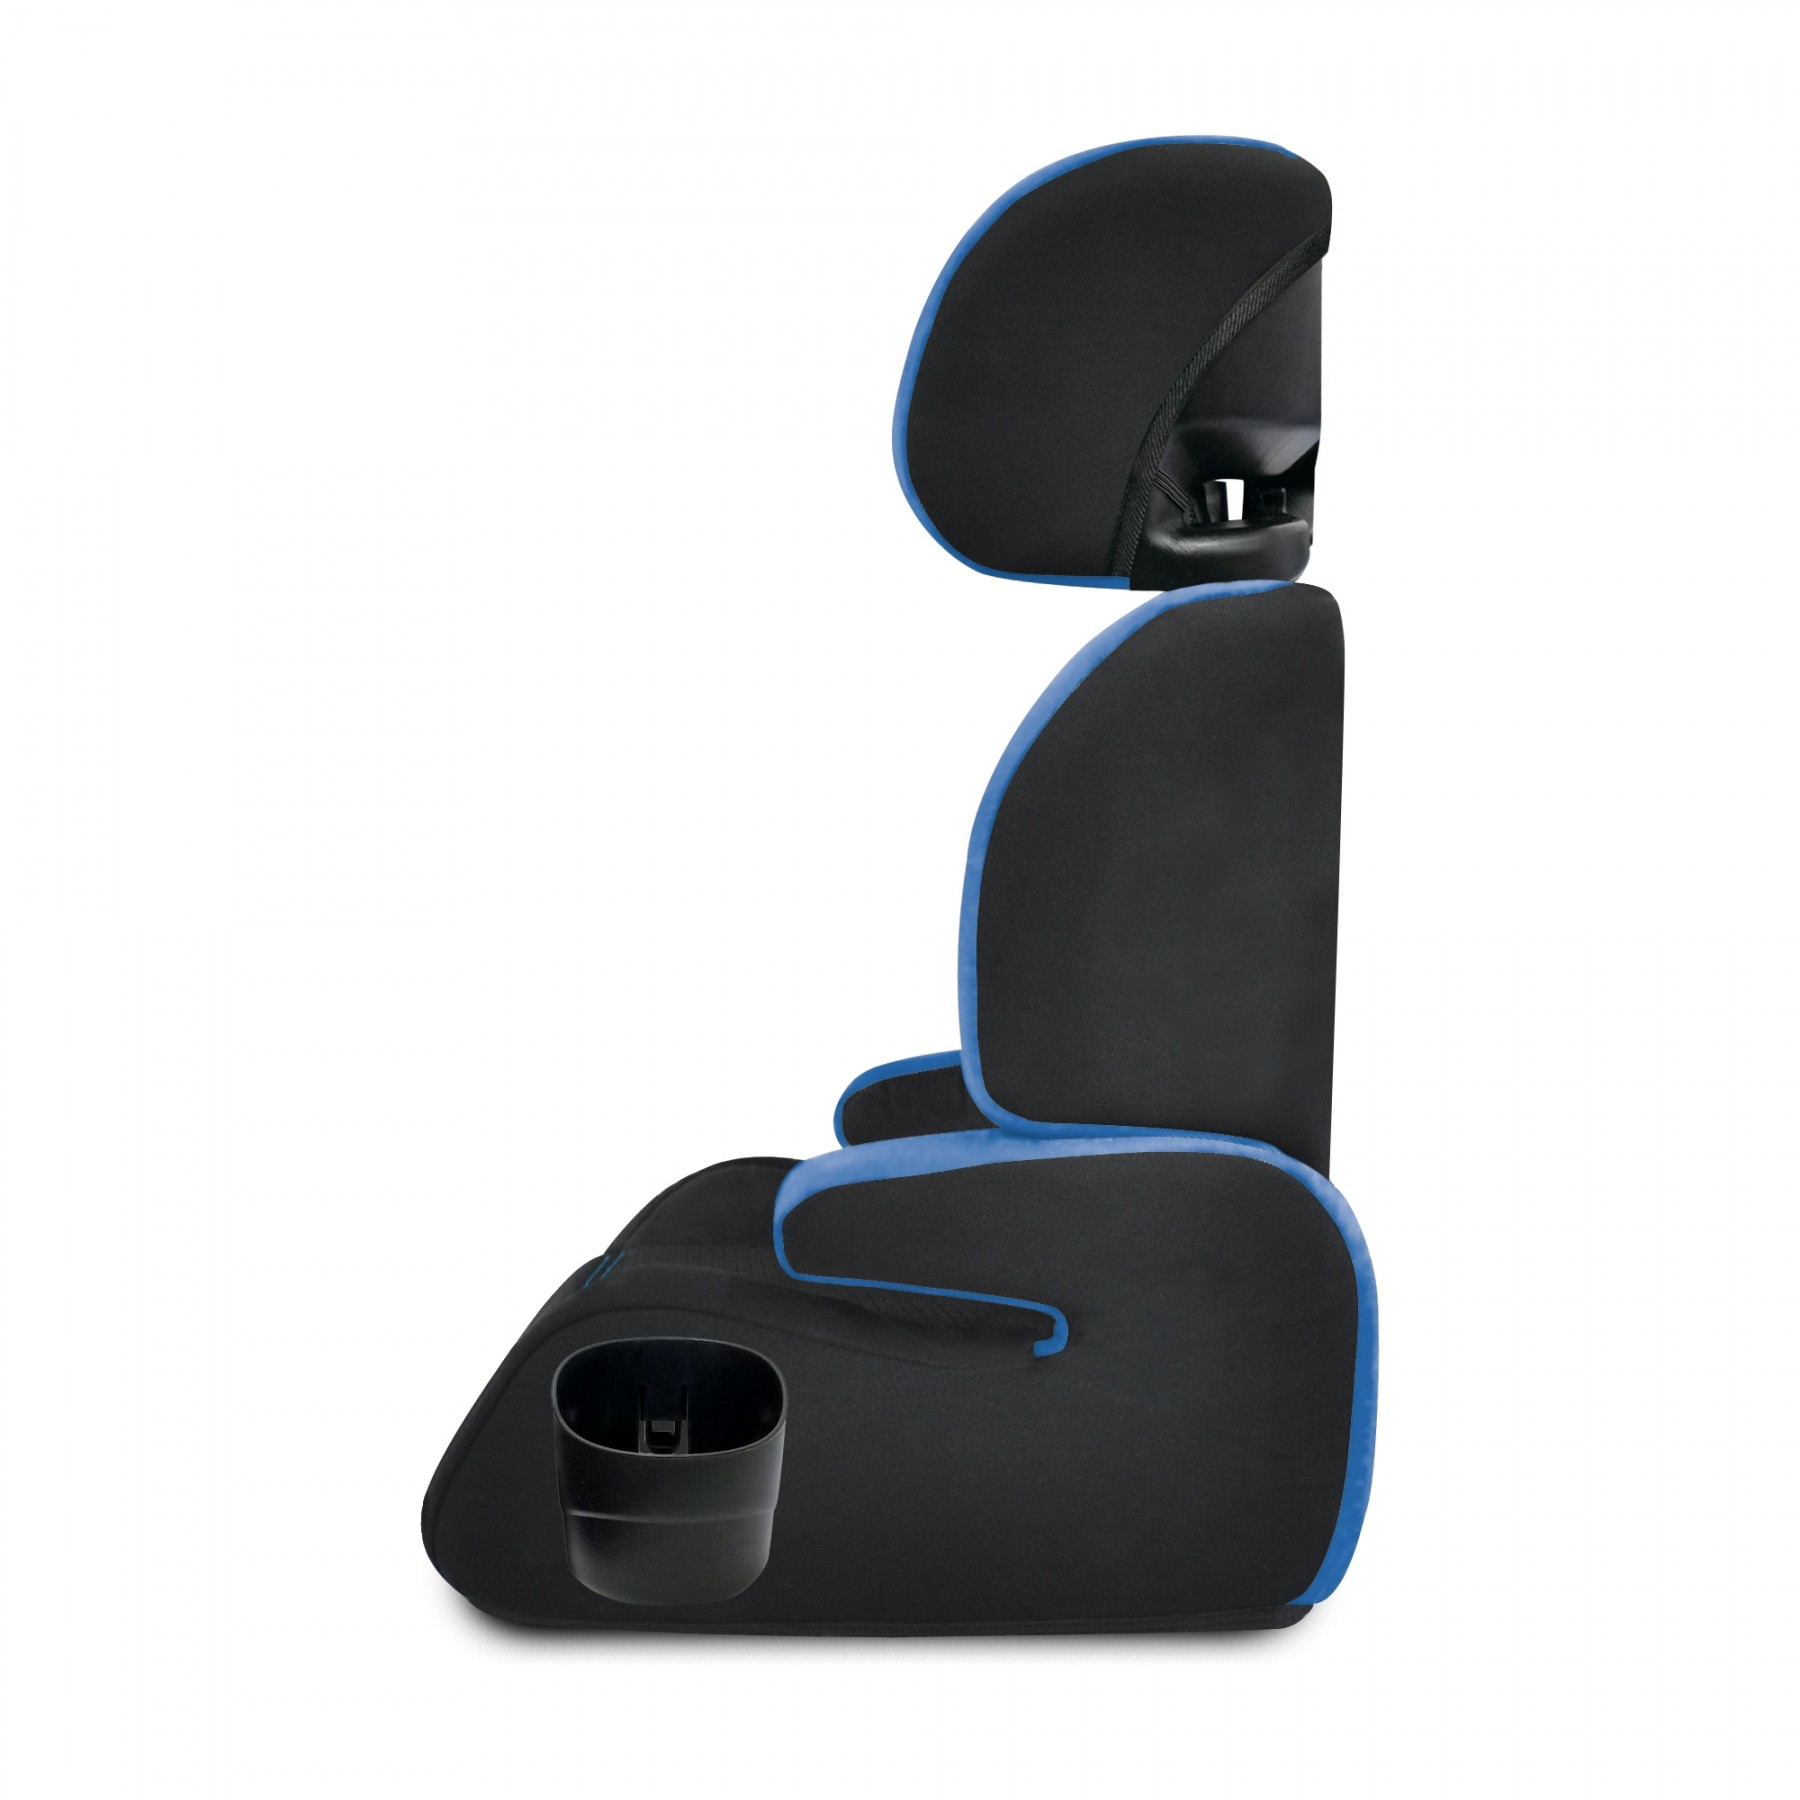 Dreamtime Deluxe Comfort Booster Car Seat - Rich Royal